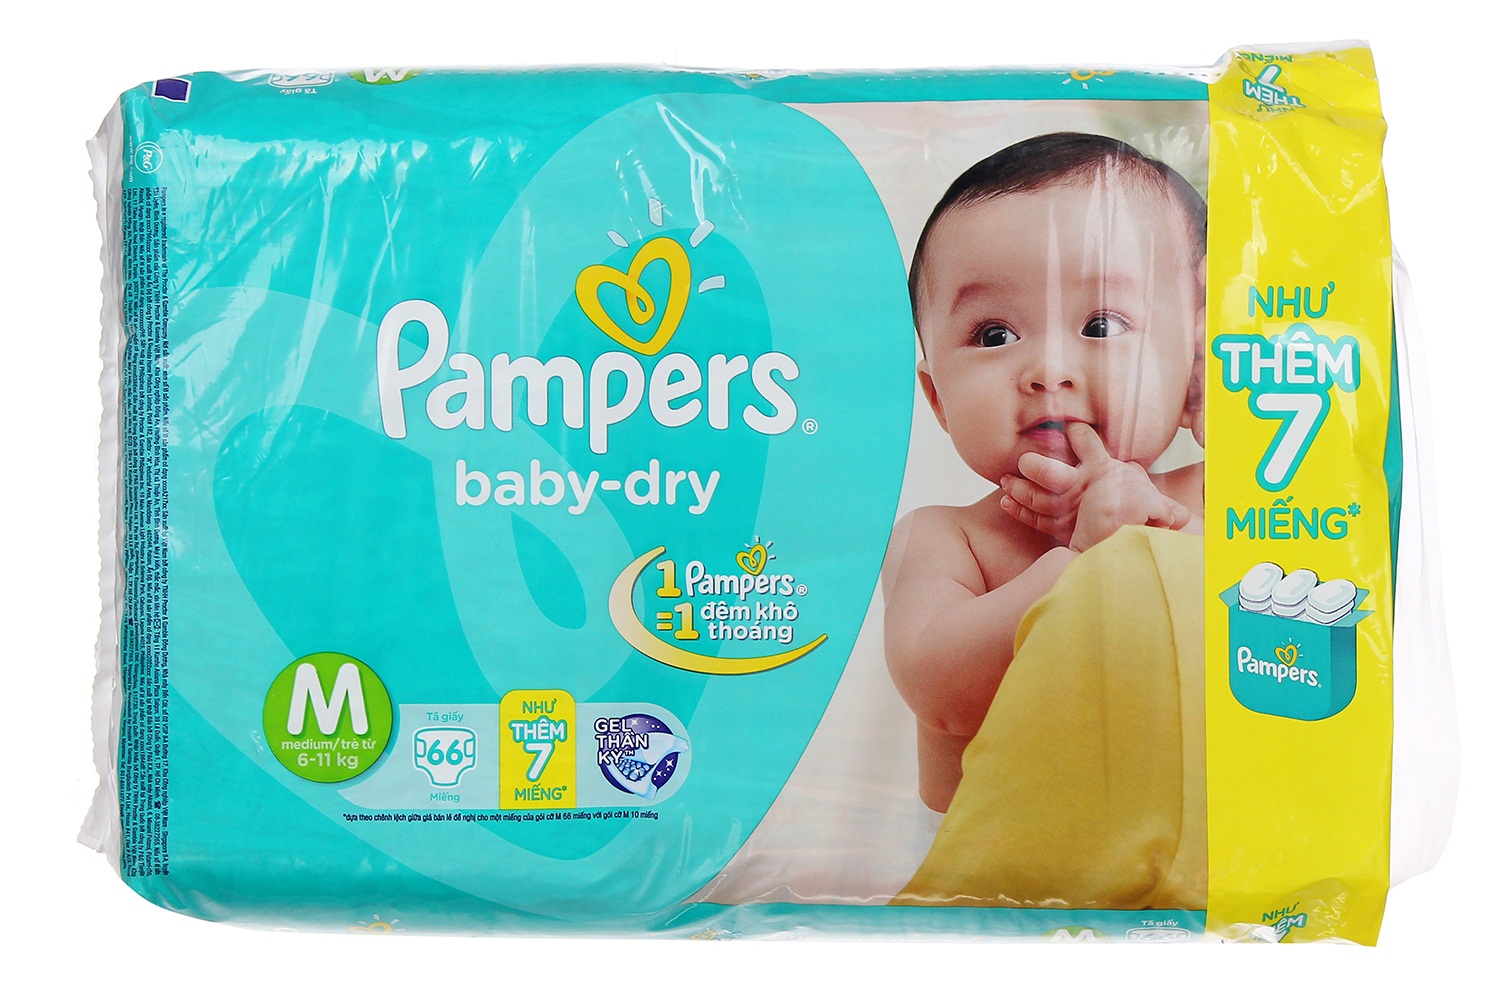 bỉm Pampers chứa dioxin 